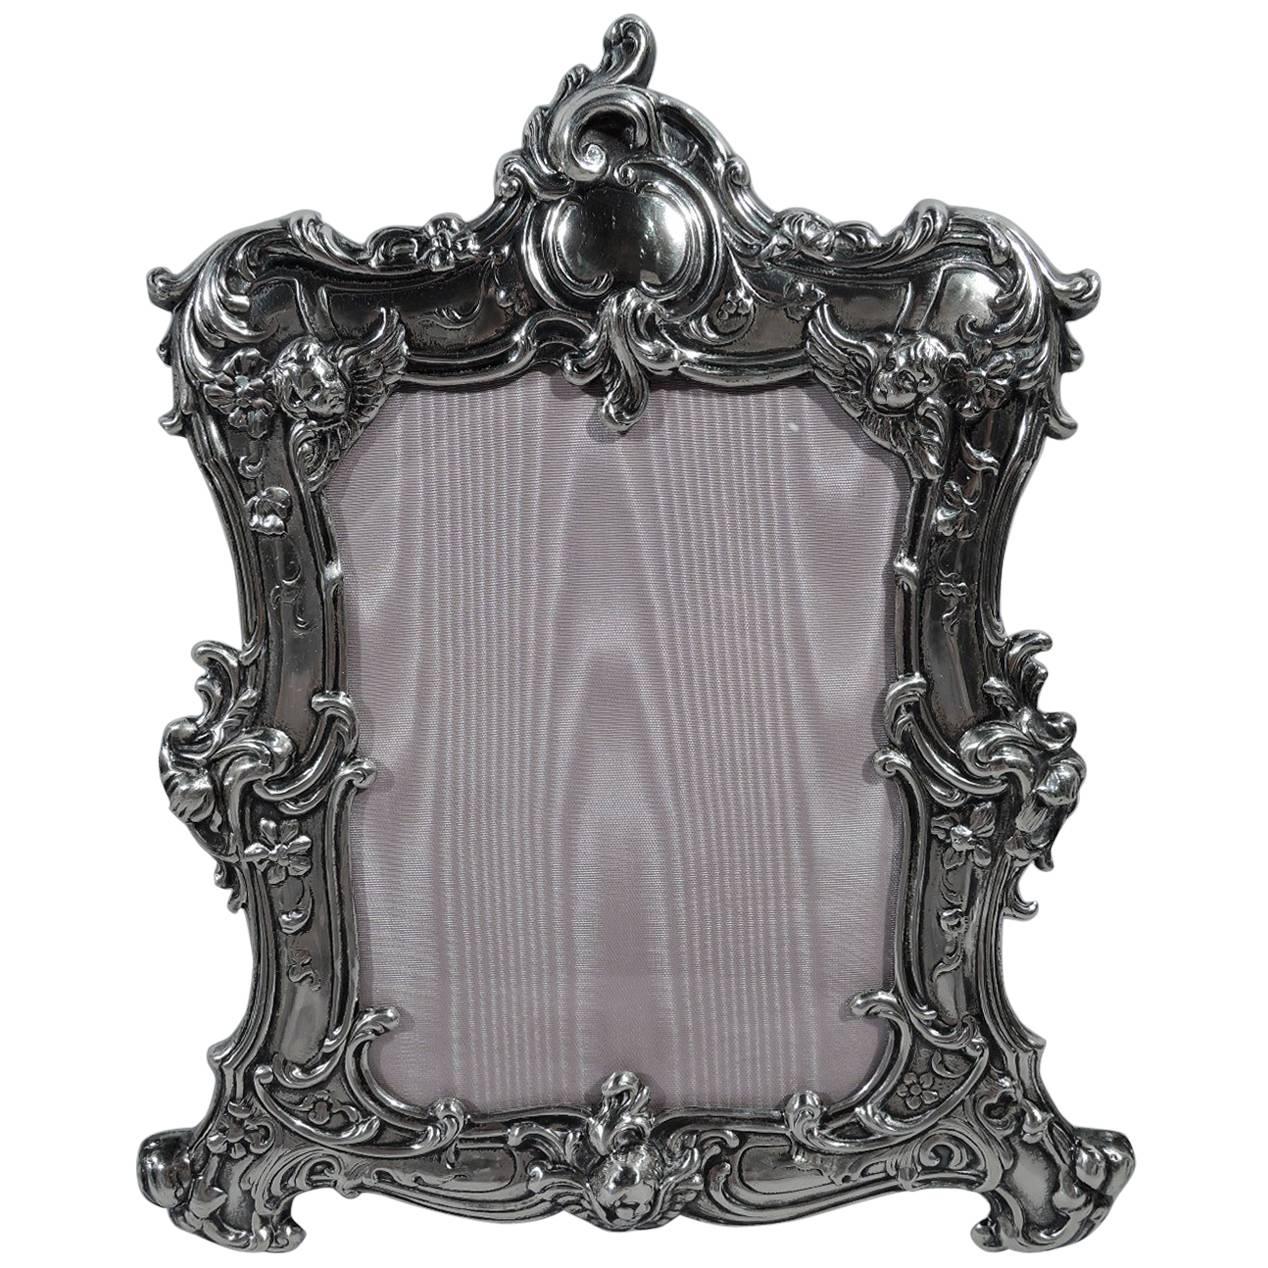 Fancy Rococo Sterling Silver Picture Frame by Gorham